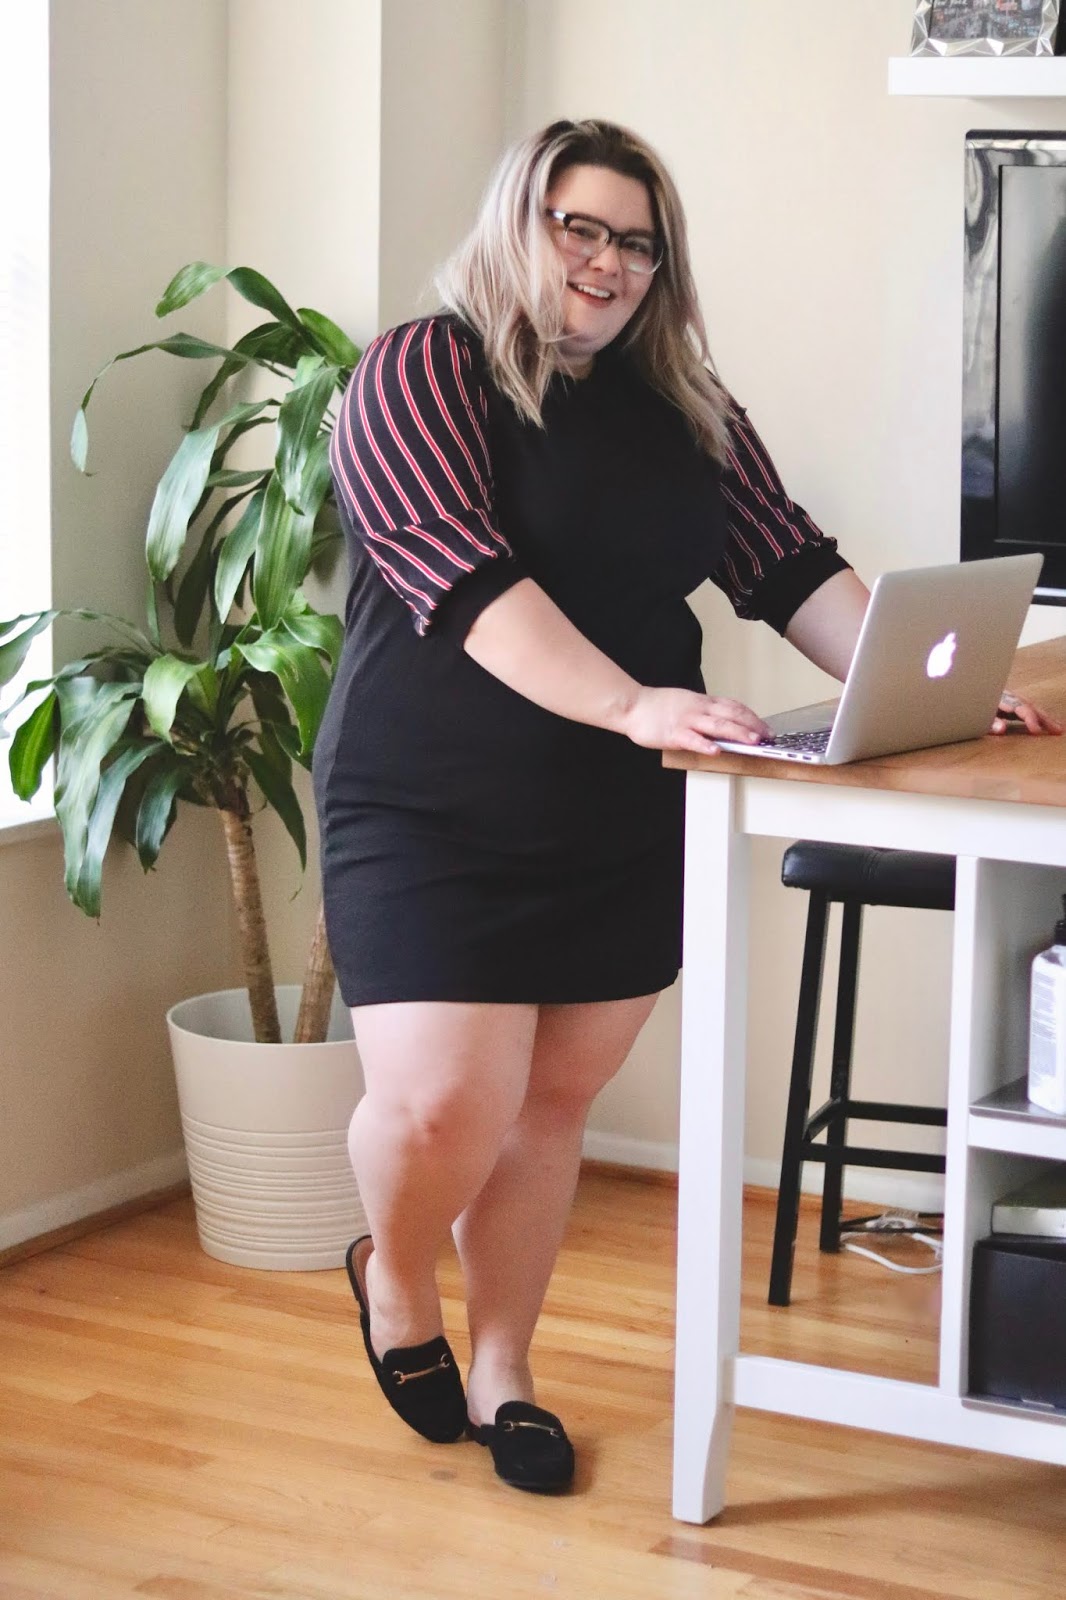 Chicago Plus Size Petite Fashion Blogger, YouTuber, and model Natalie Craig, of Natalie in the City, buys a whole wardrobe for under $200 at Gordmans, including active wear, work wear, casual looks, and sexy dresses for a night out on the town.